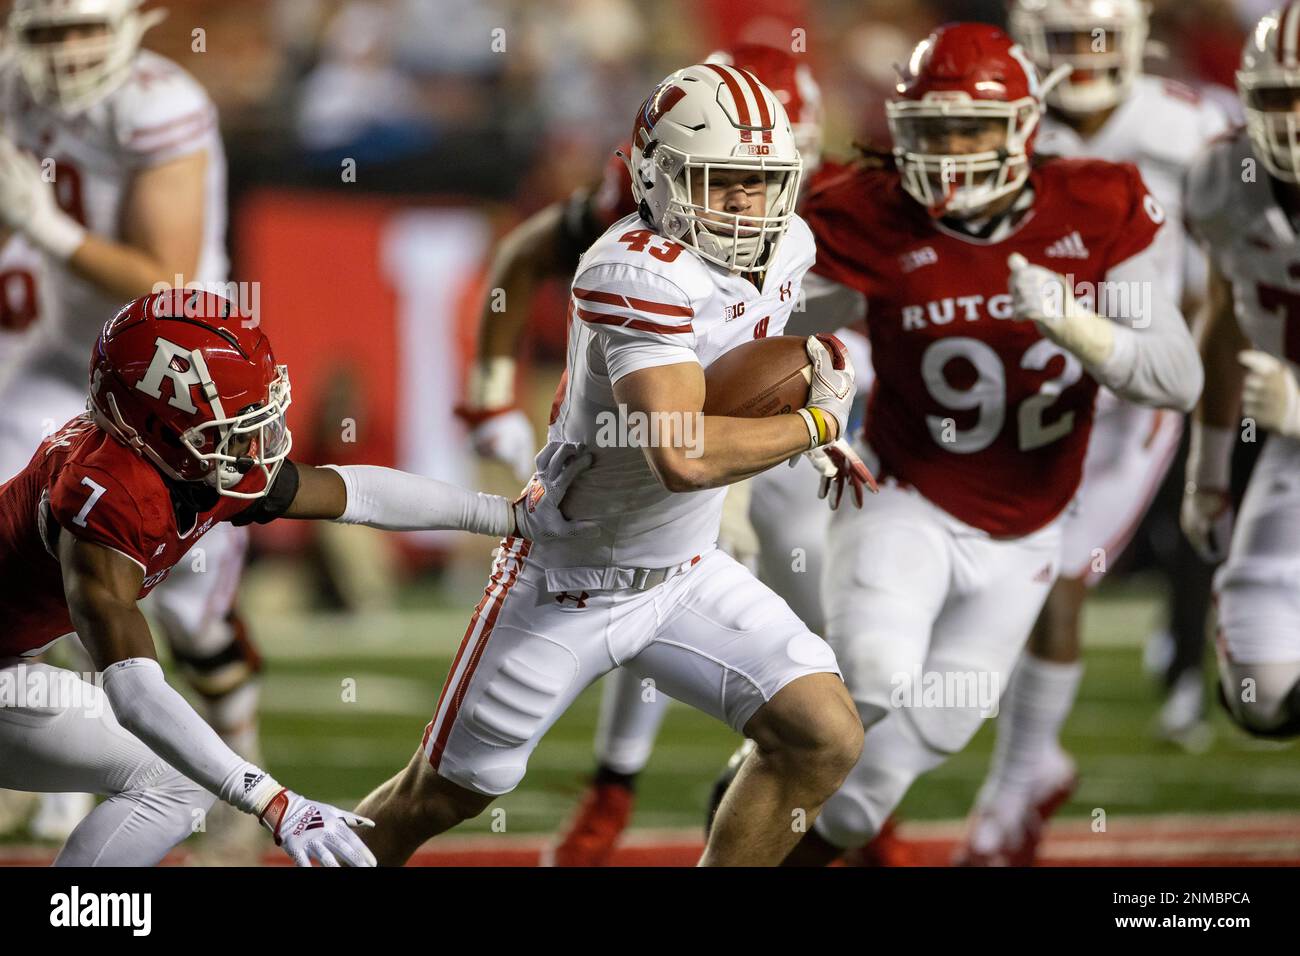 Wisconsin Badgers vs. Rutgers Scarlet Knights college football photos